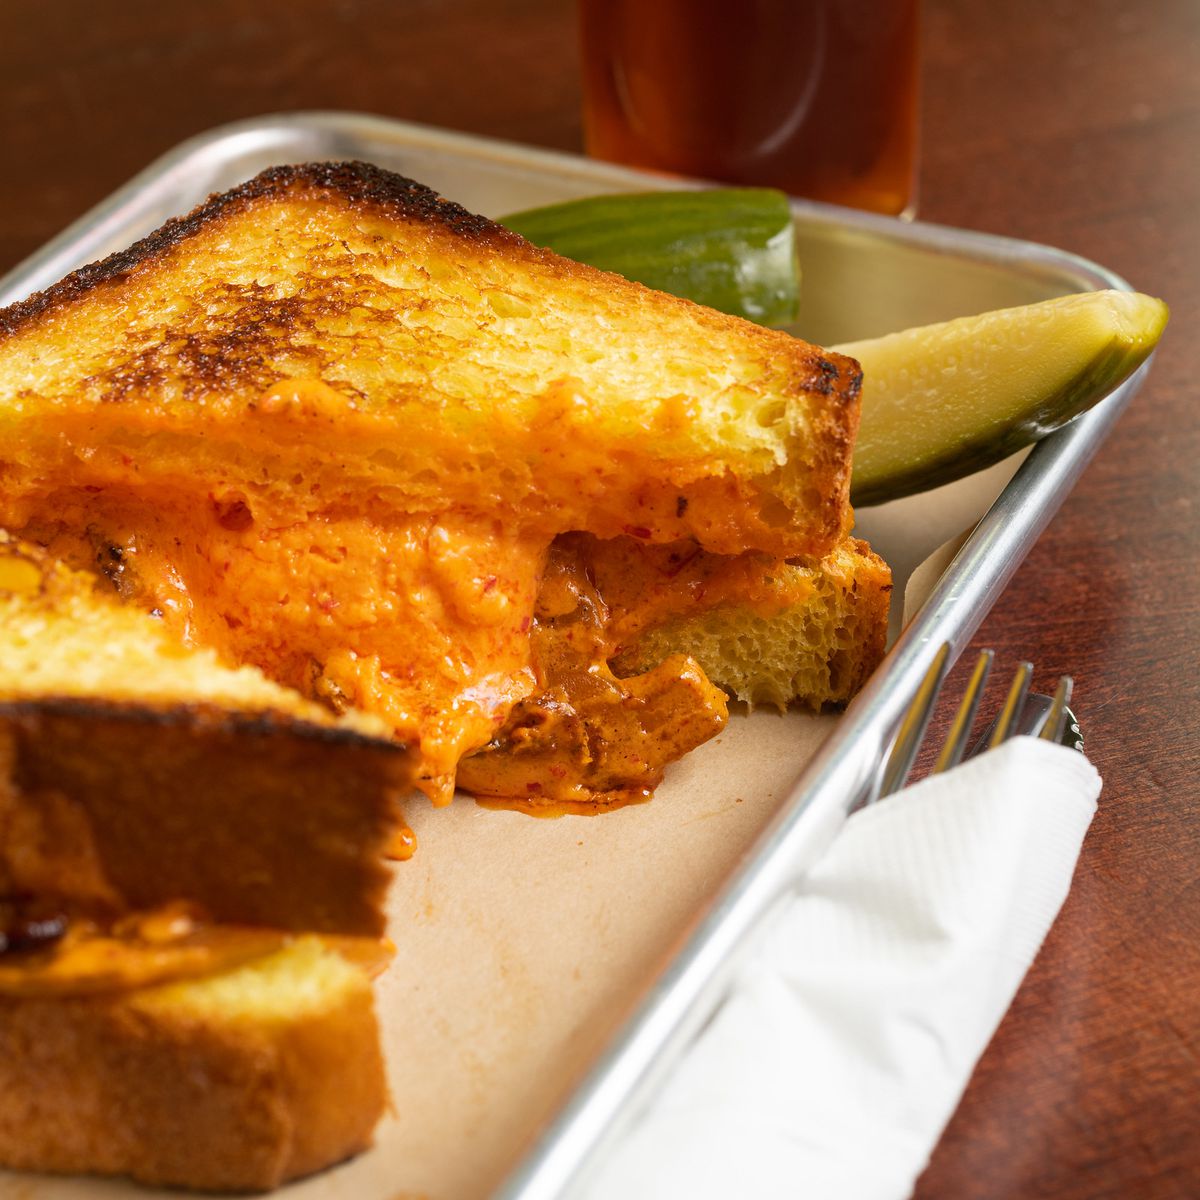 A grilled cheese sandwich. with a pickle slice.